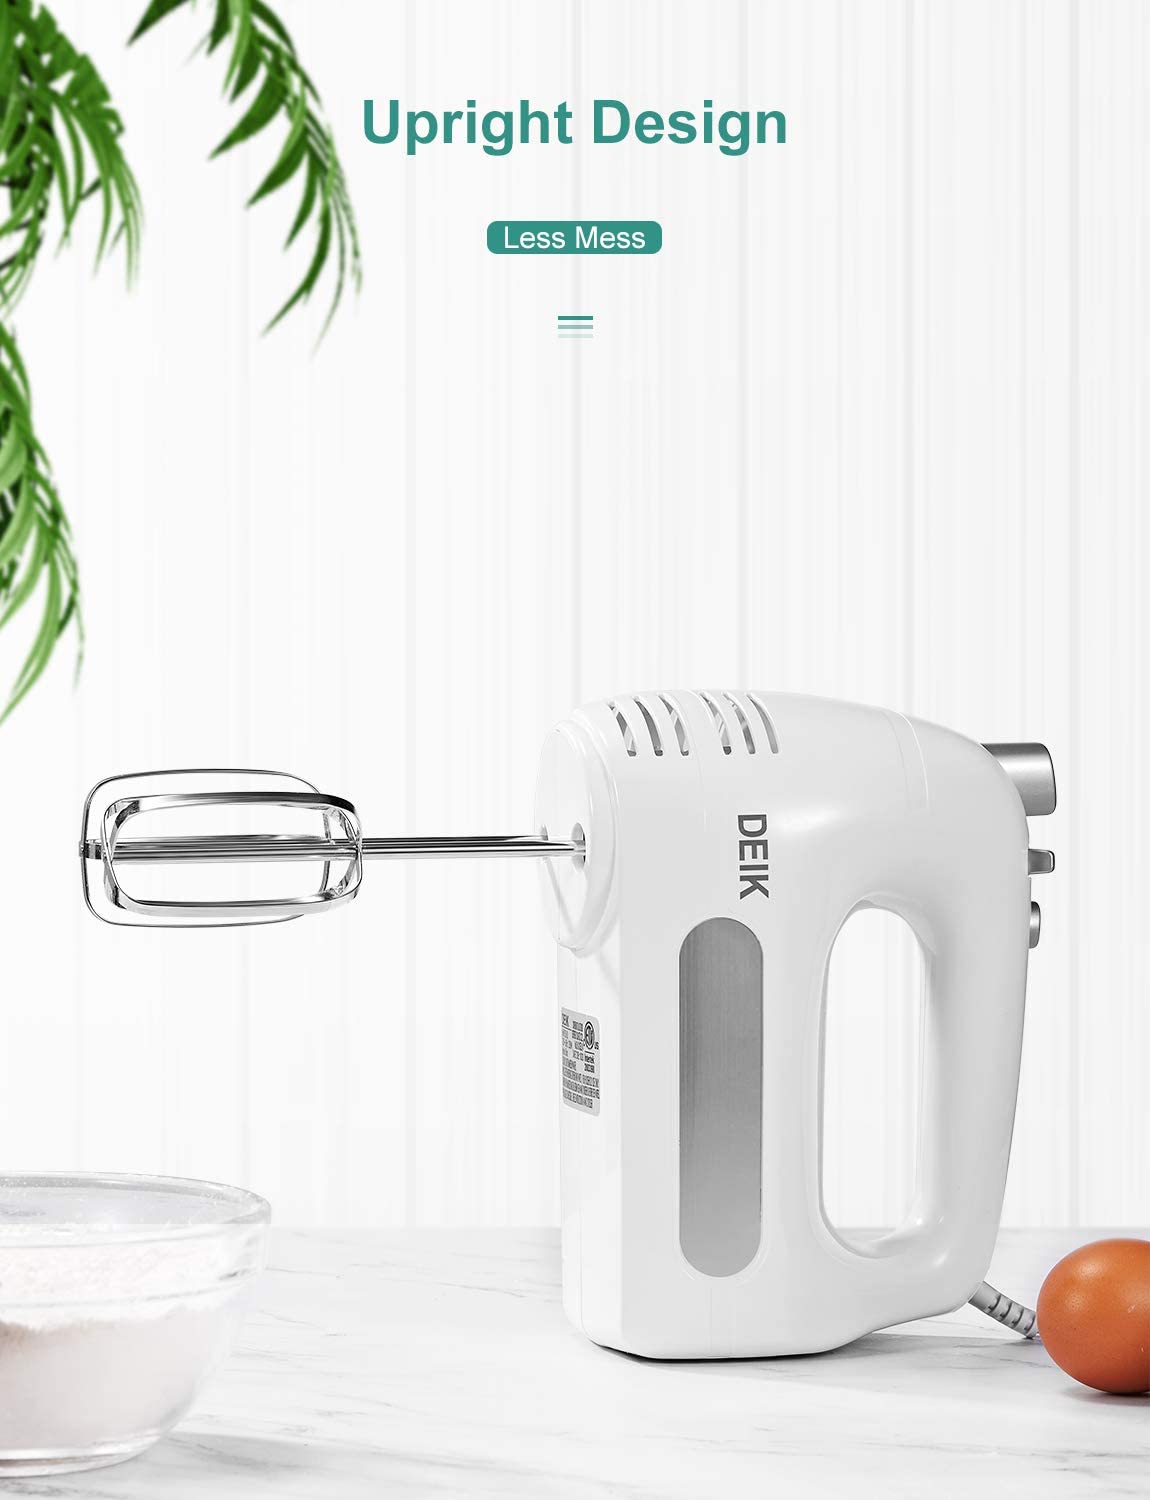 Deik Electric Hand Mixer,6-Speed 250W Hand Mixer Electric – Hand Held Mixer Includes 2 Stainless Steel Beaters and 2 Dough Hooks, Turbo Button, One Button Eject Design, Upright Design,  White